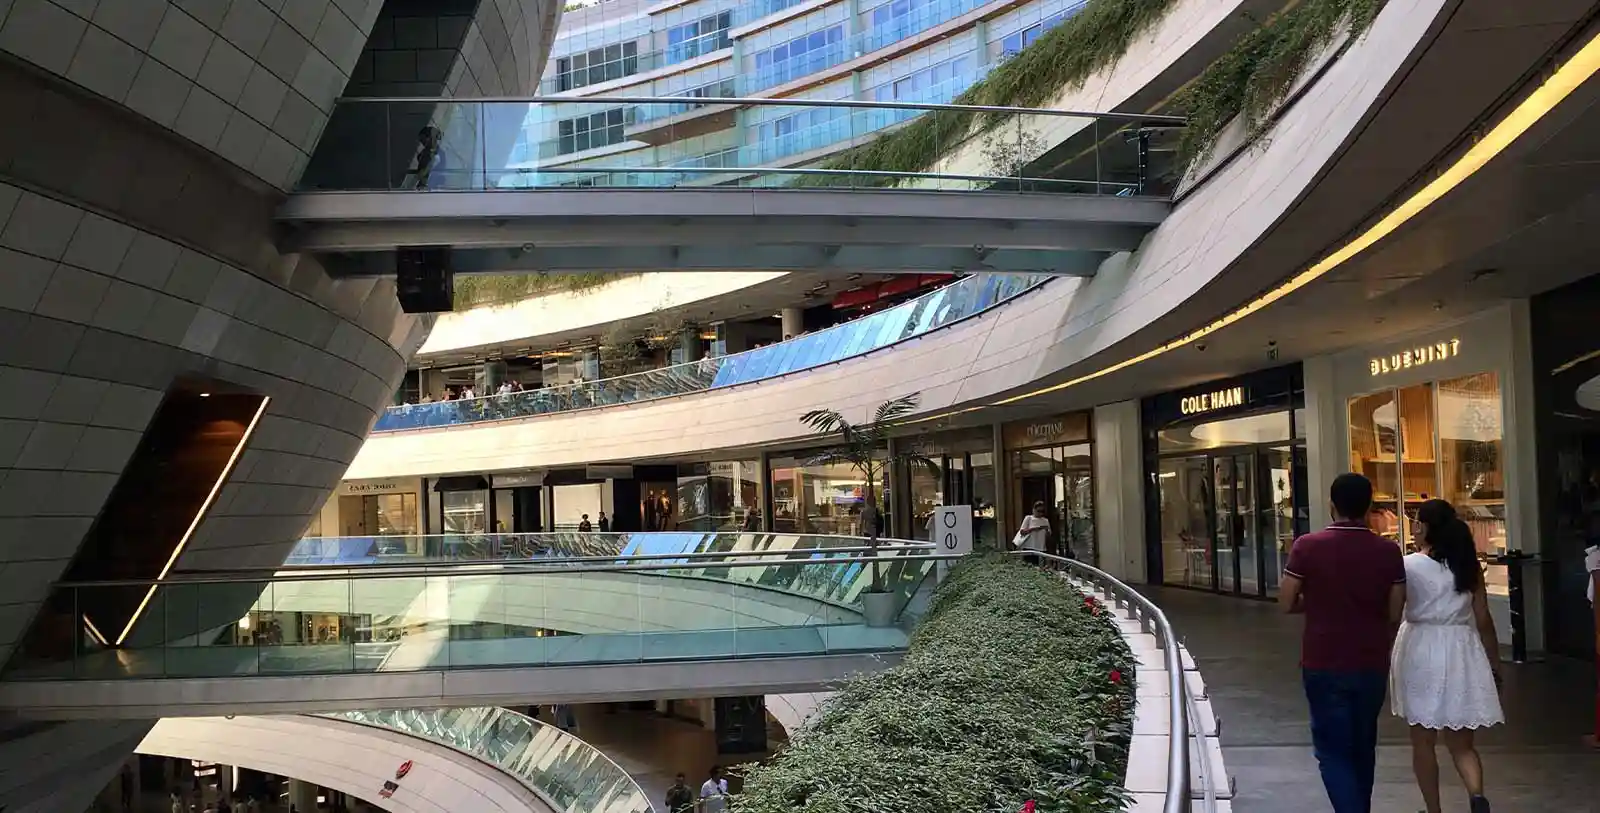 Kanyon shopping center in Levent Istanbul is an upscale mall where you can see a unique architecture and a shape of canyons.